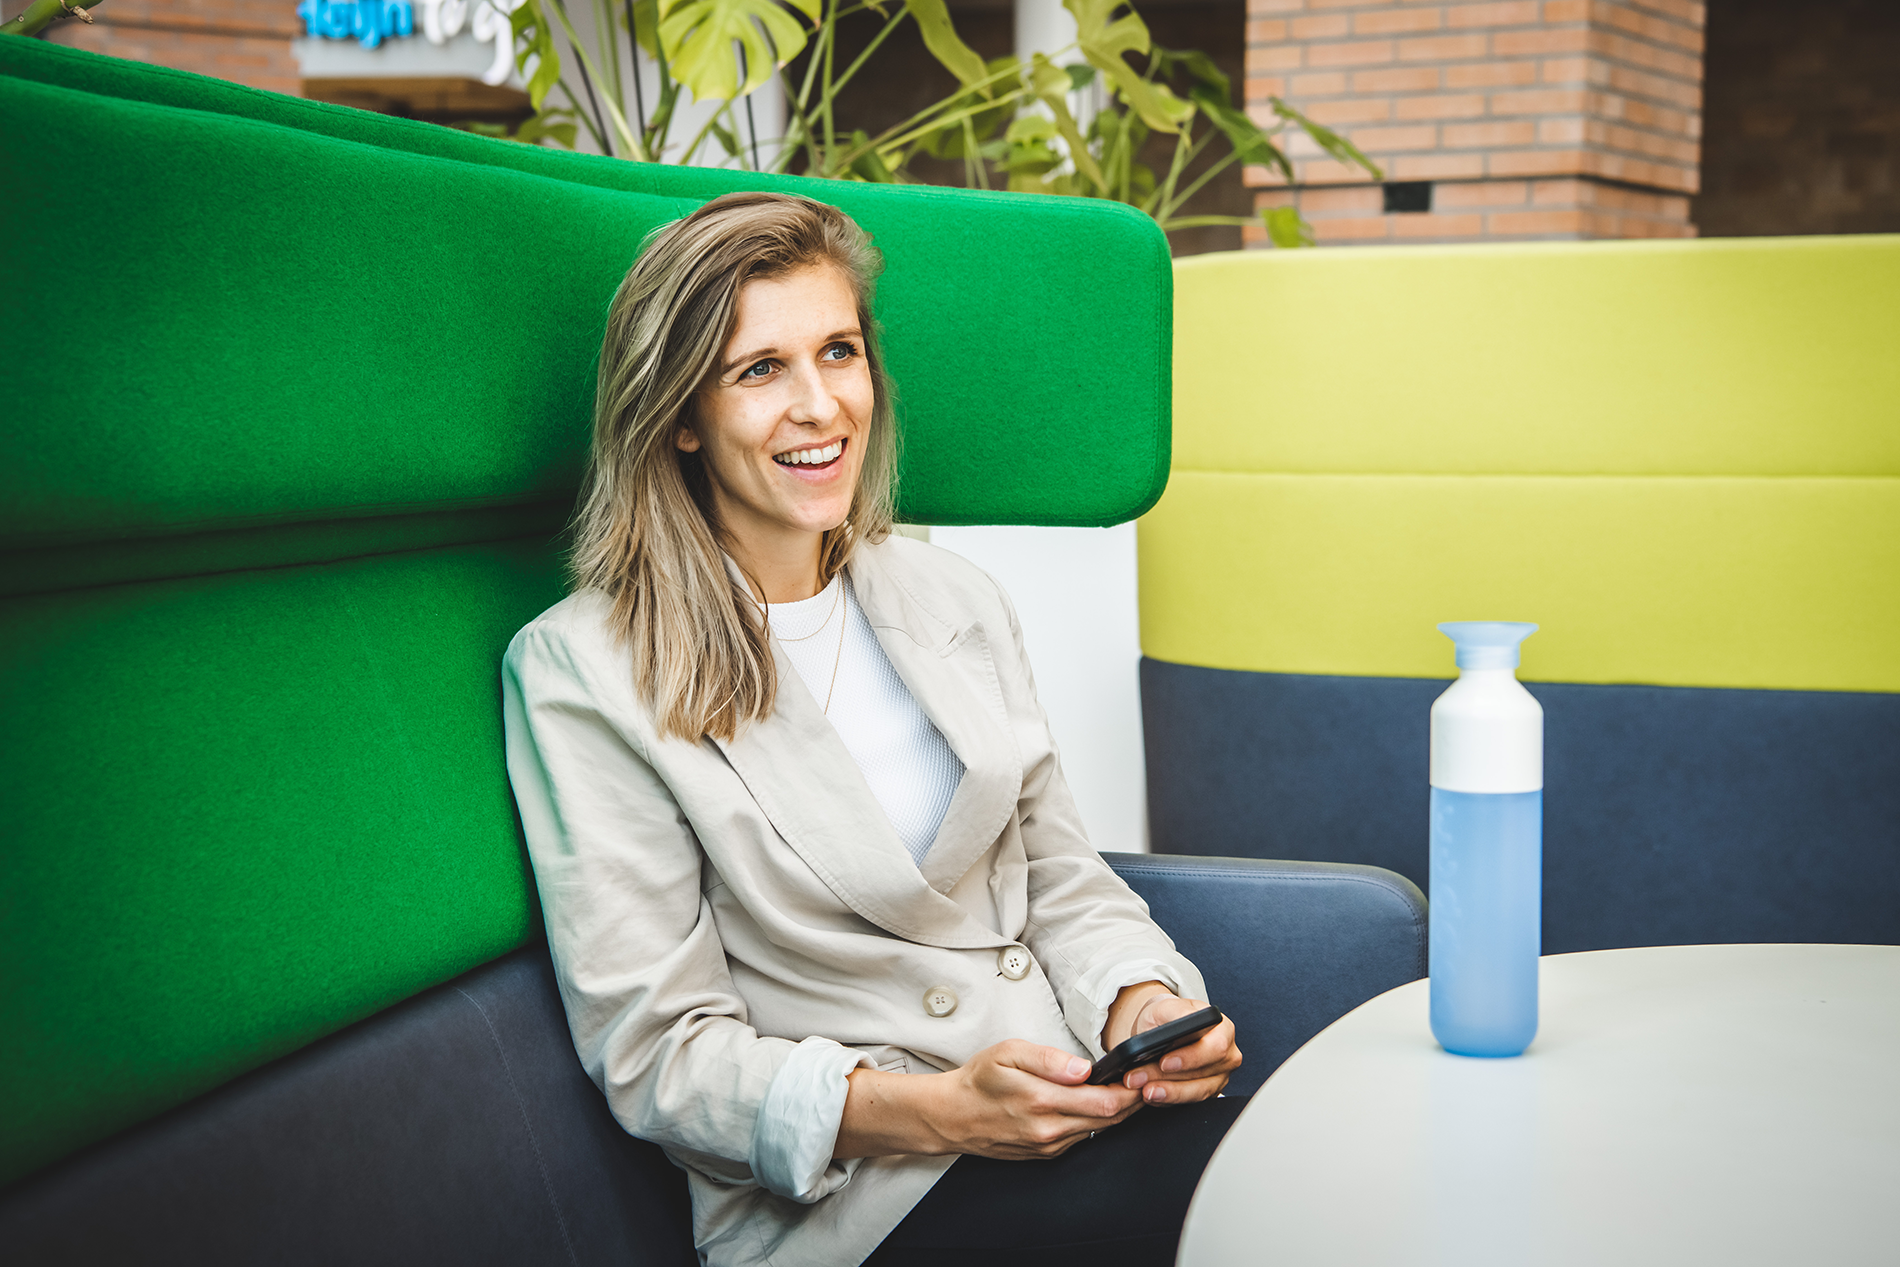 Janneke_smiling_and_sitting_in_green_chair_AholdDelhaize.png